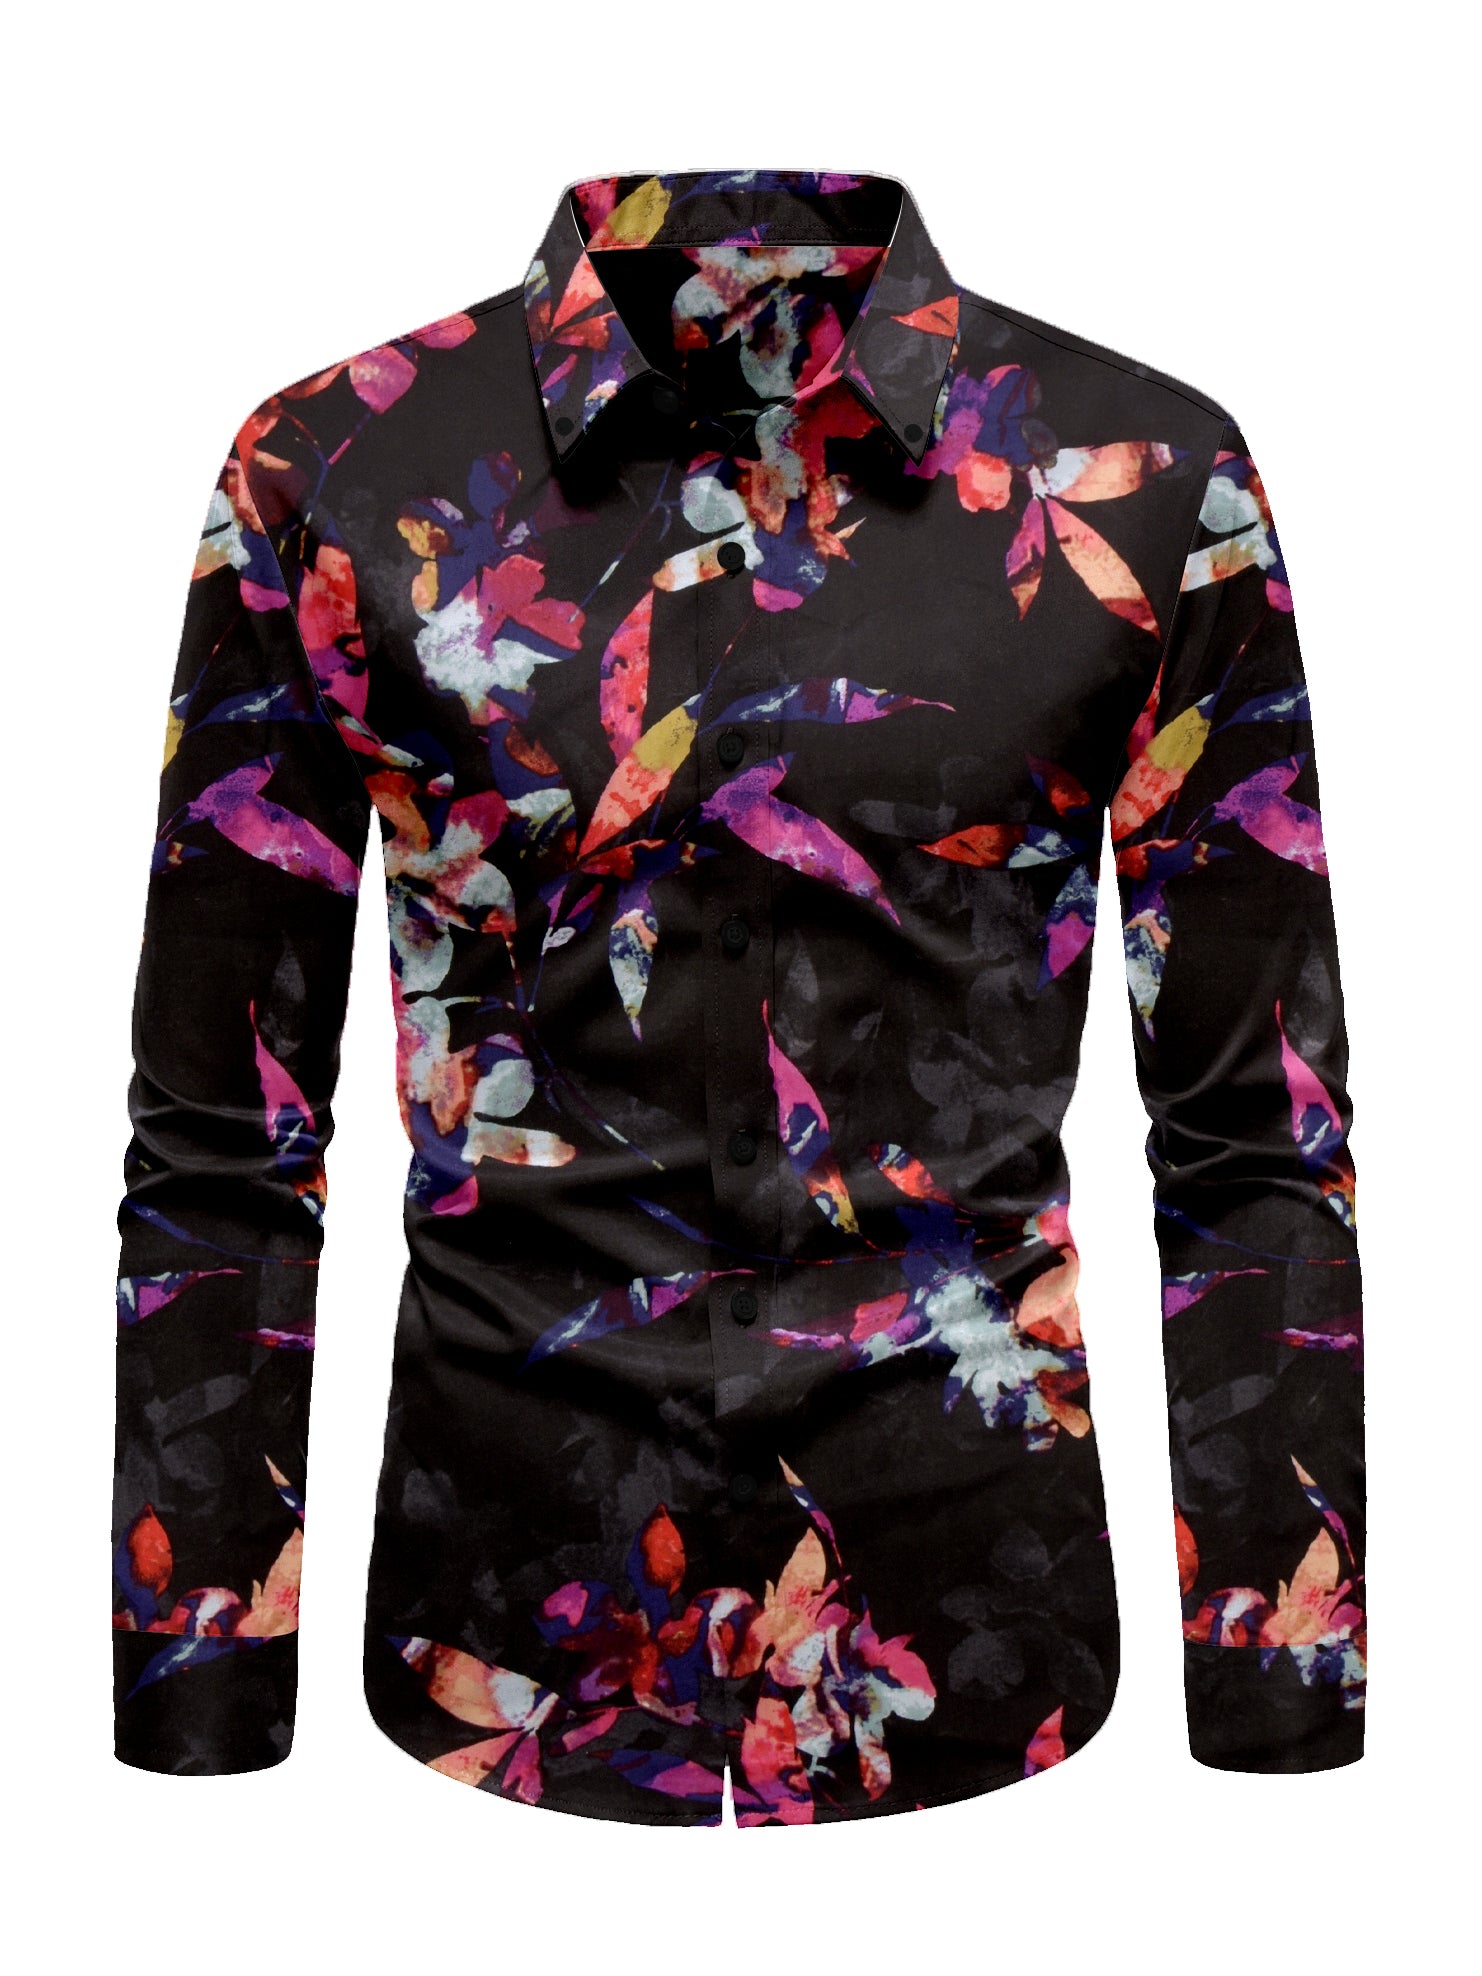 Oxen Nexoluce Premium Slim Fit Casual Shirt For Men-Black with Allover Floral Print-BE1187